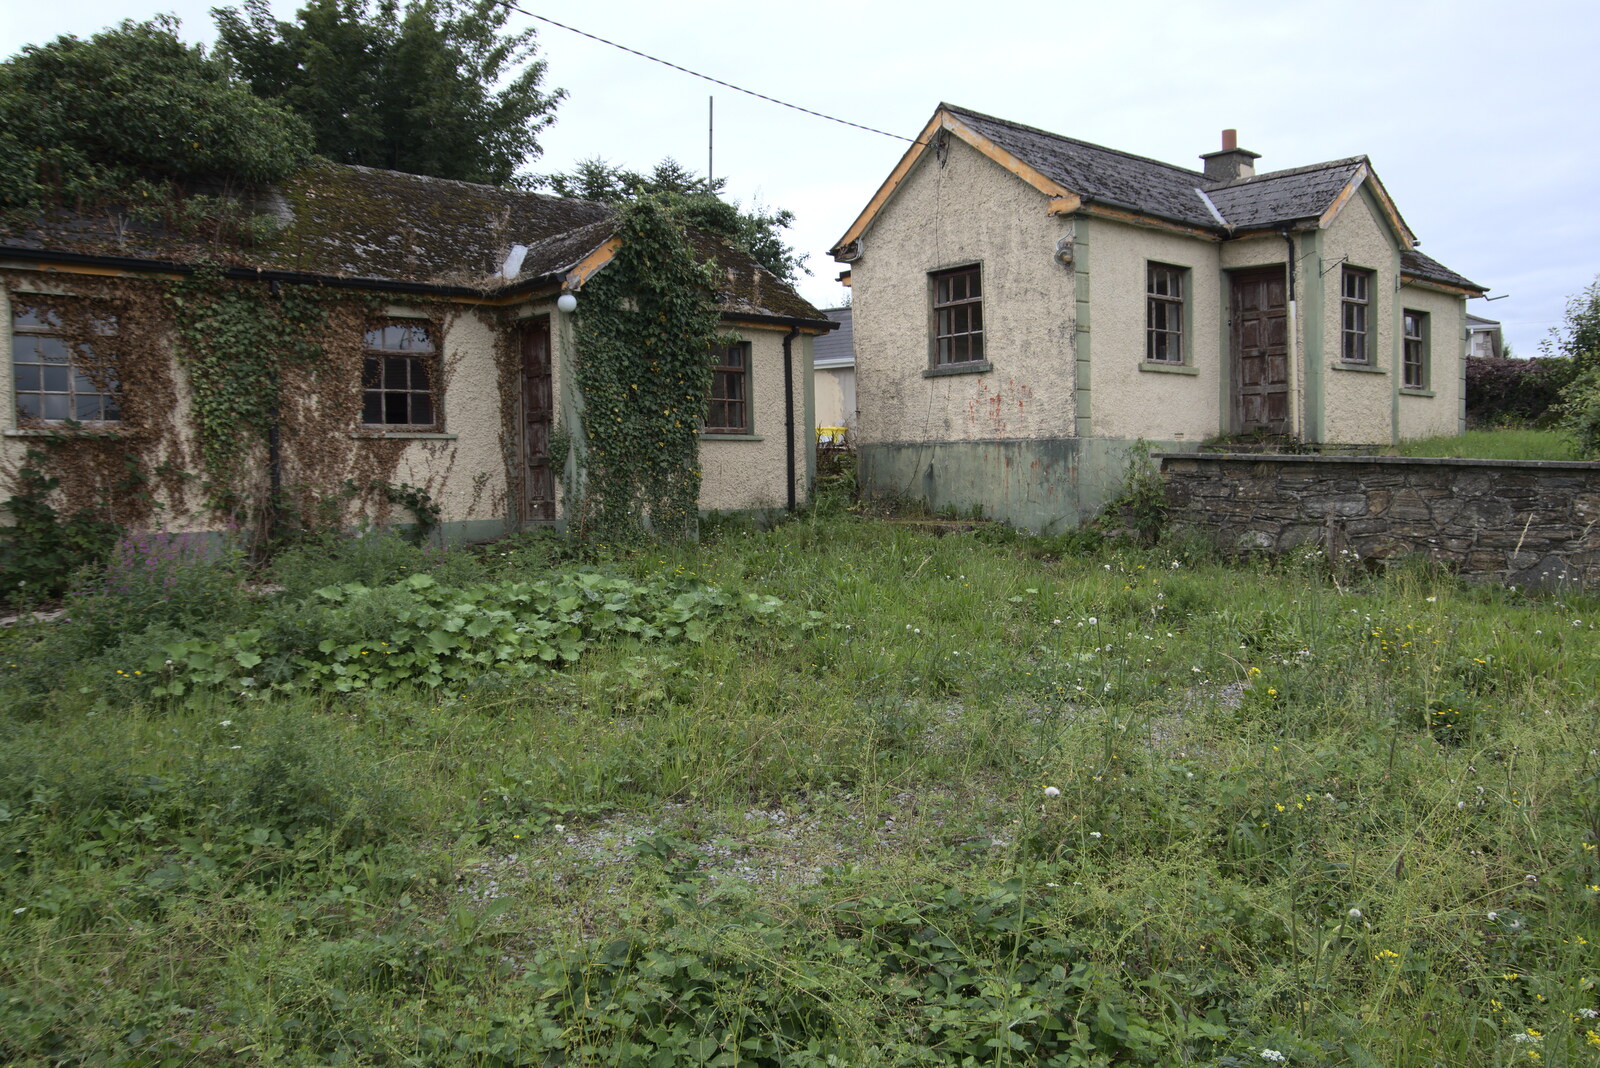 A Trip to Manorhamilton, County Leitrim, Ireland - 11th August 2021: Derelict buildings covered in weeds